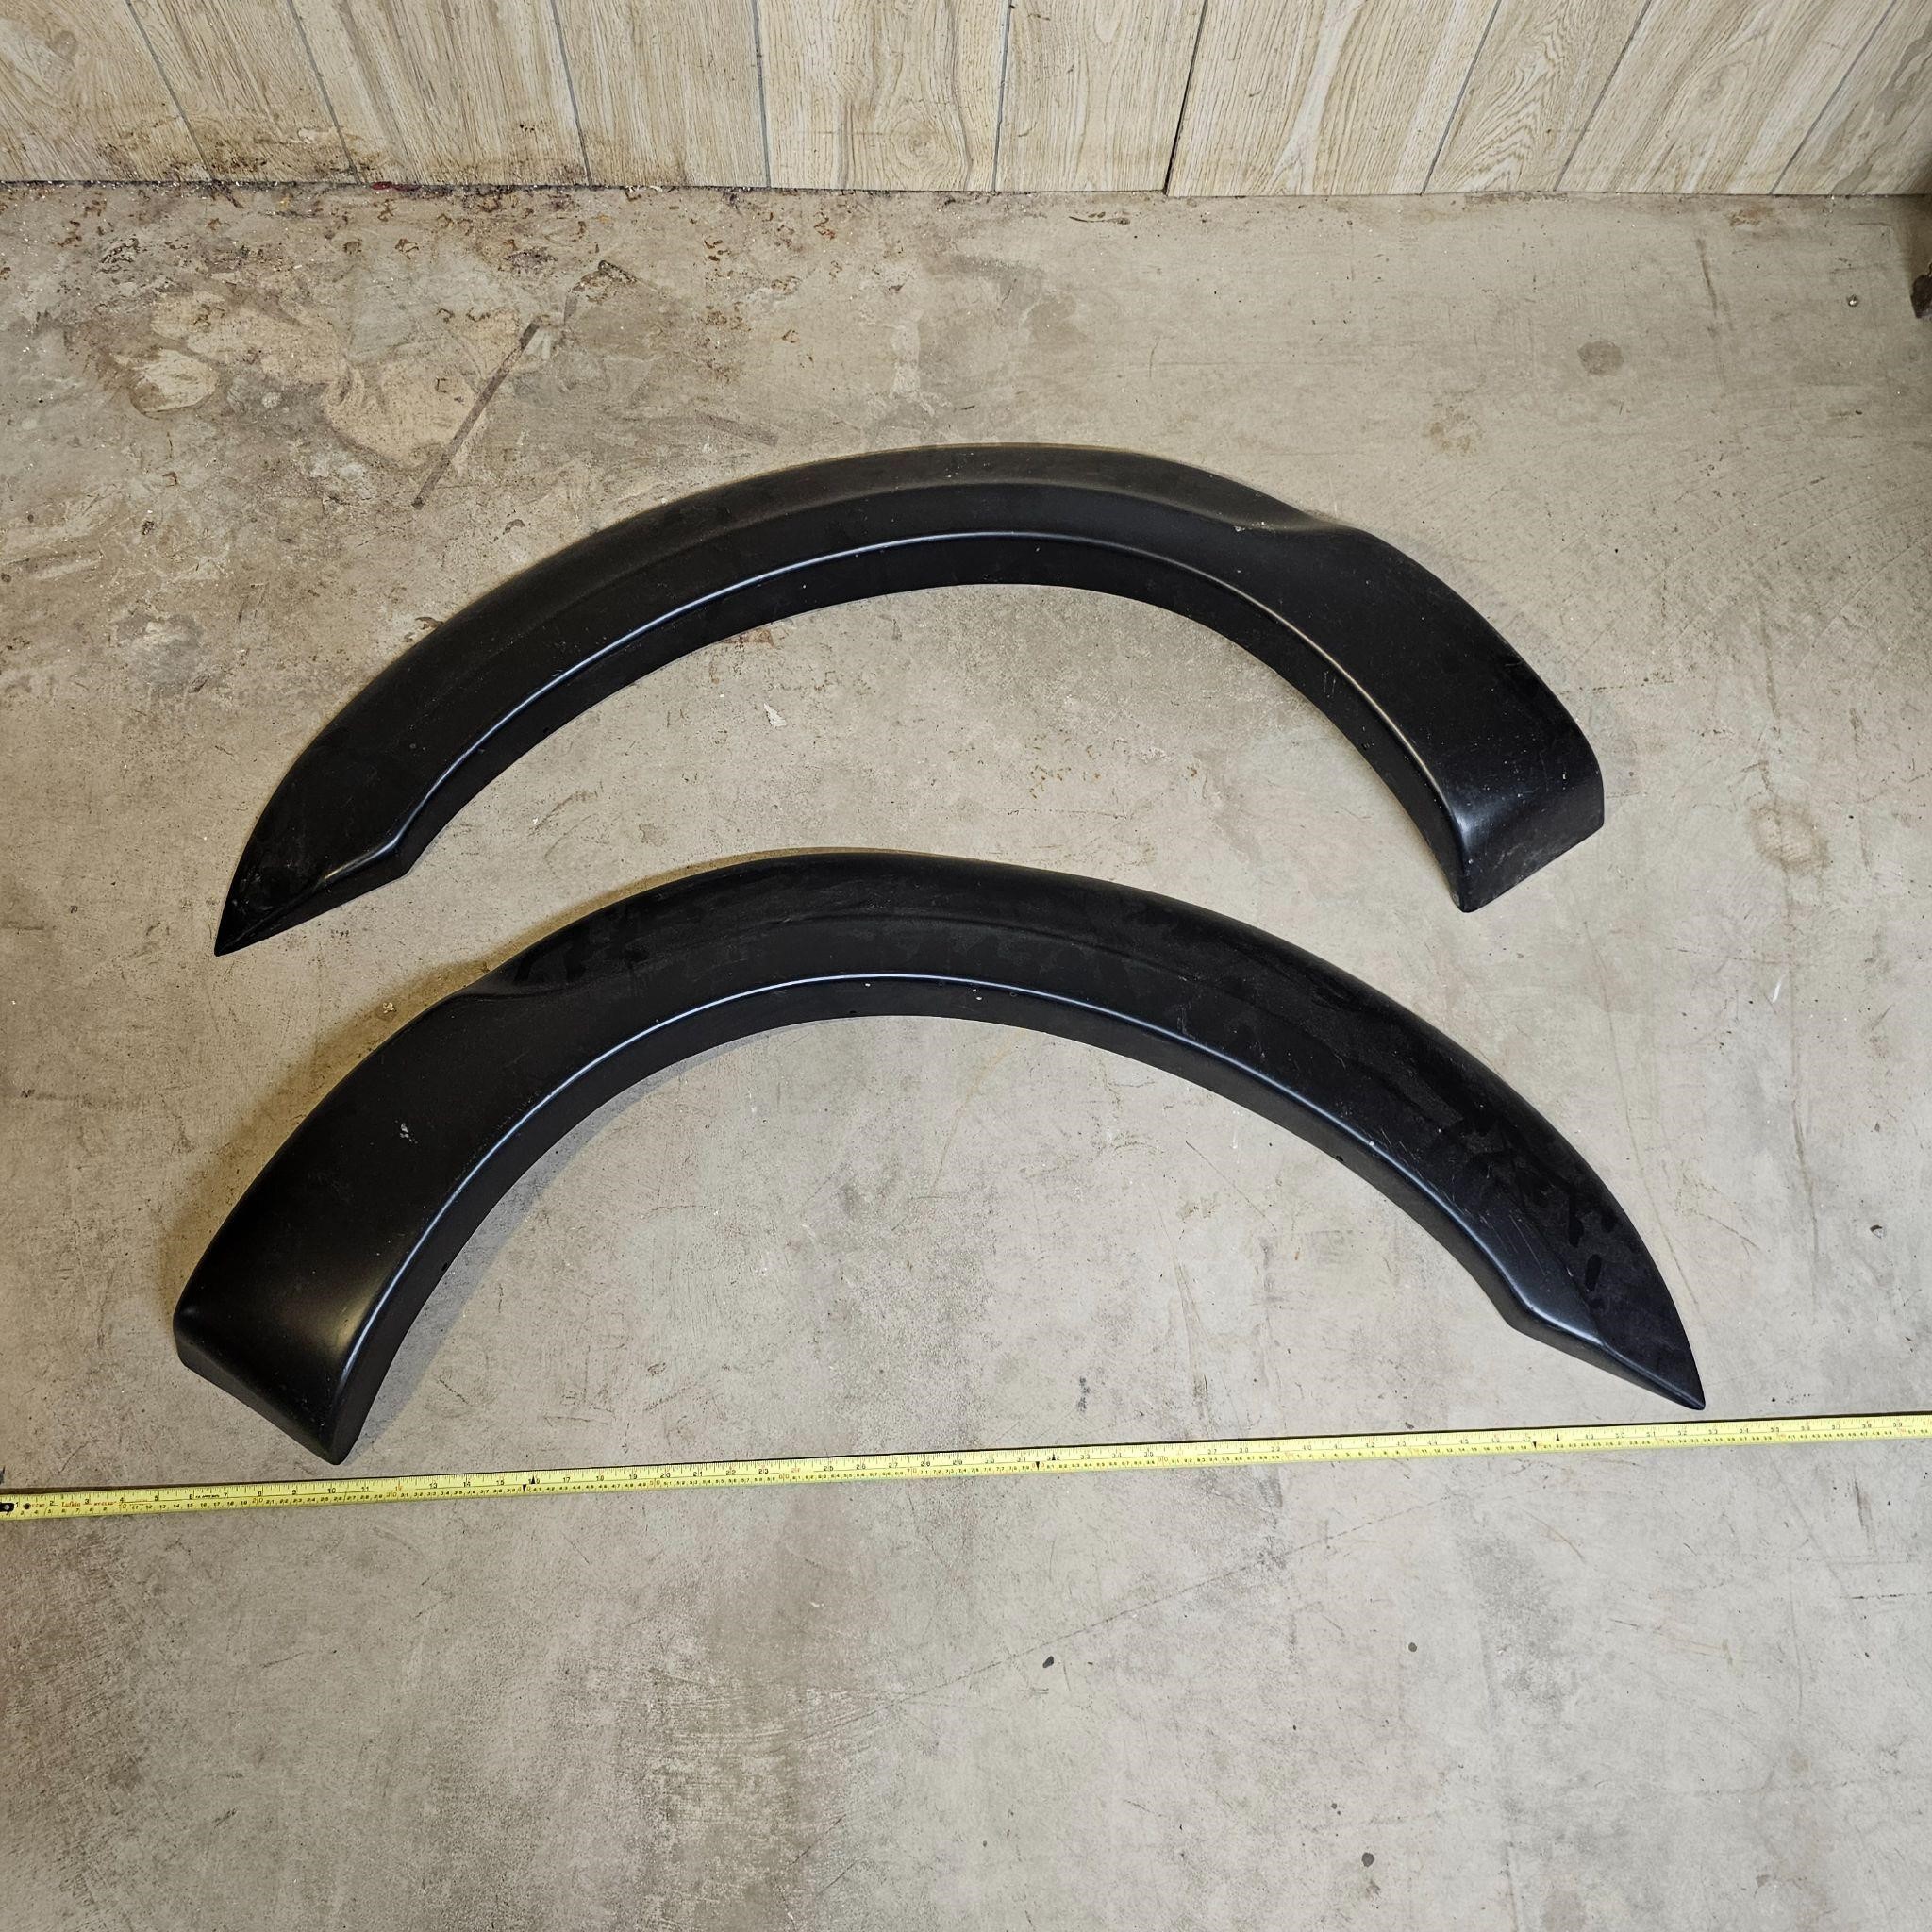 Front Fenders for a SUV